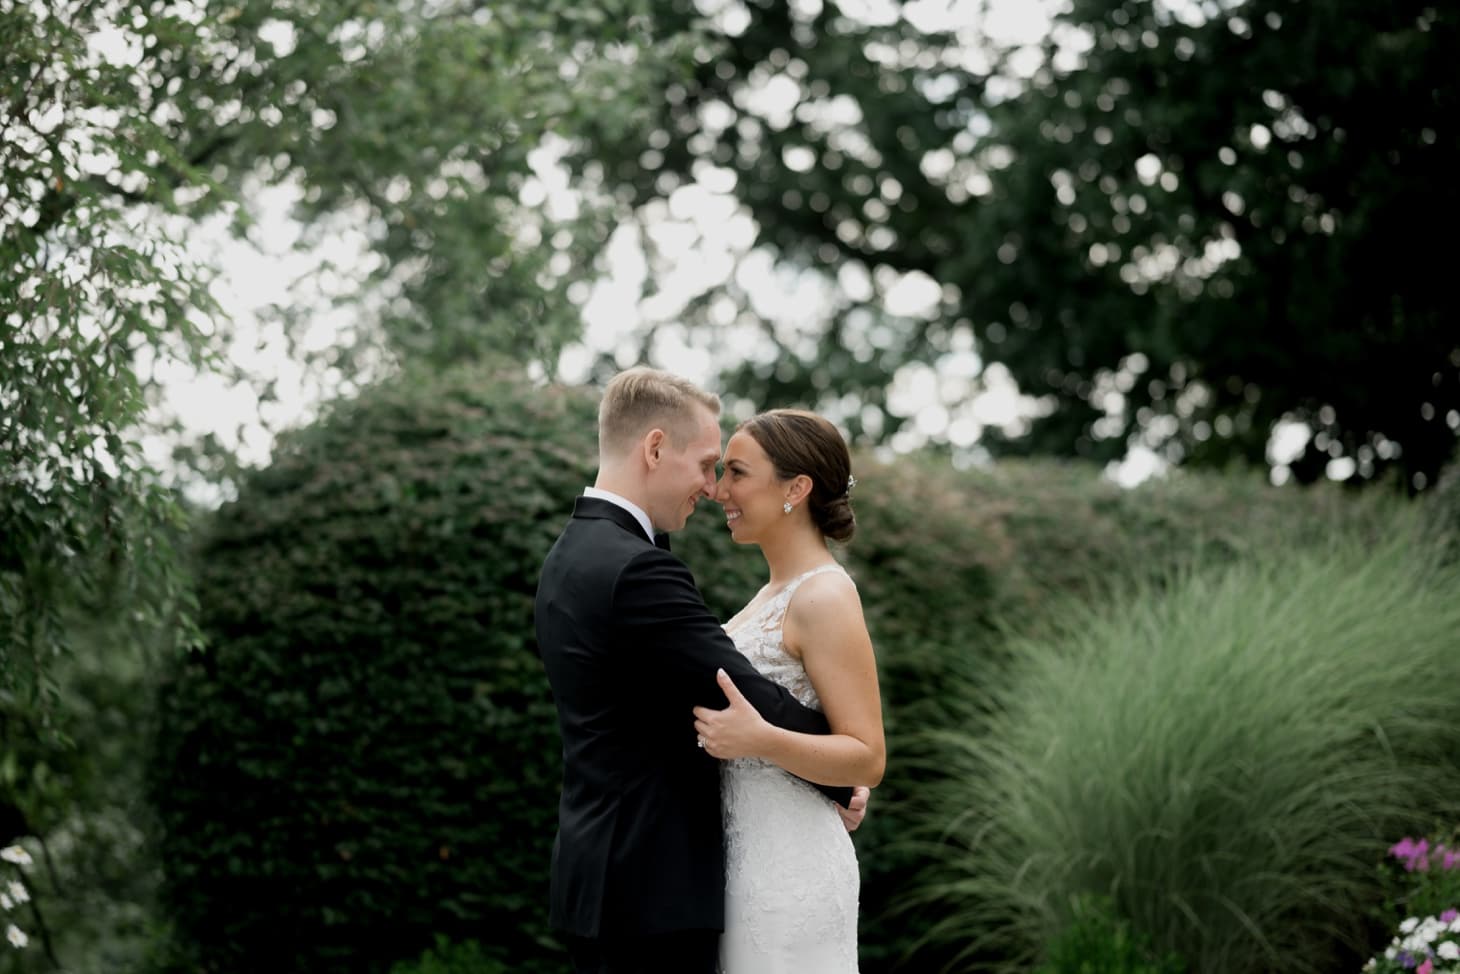 51 bride and groom photography new jersey wedding